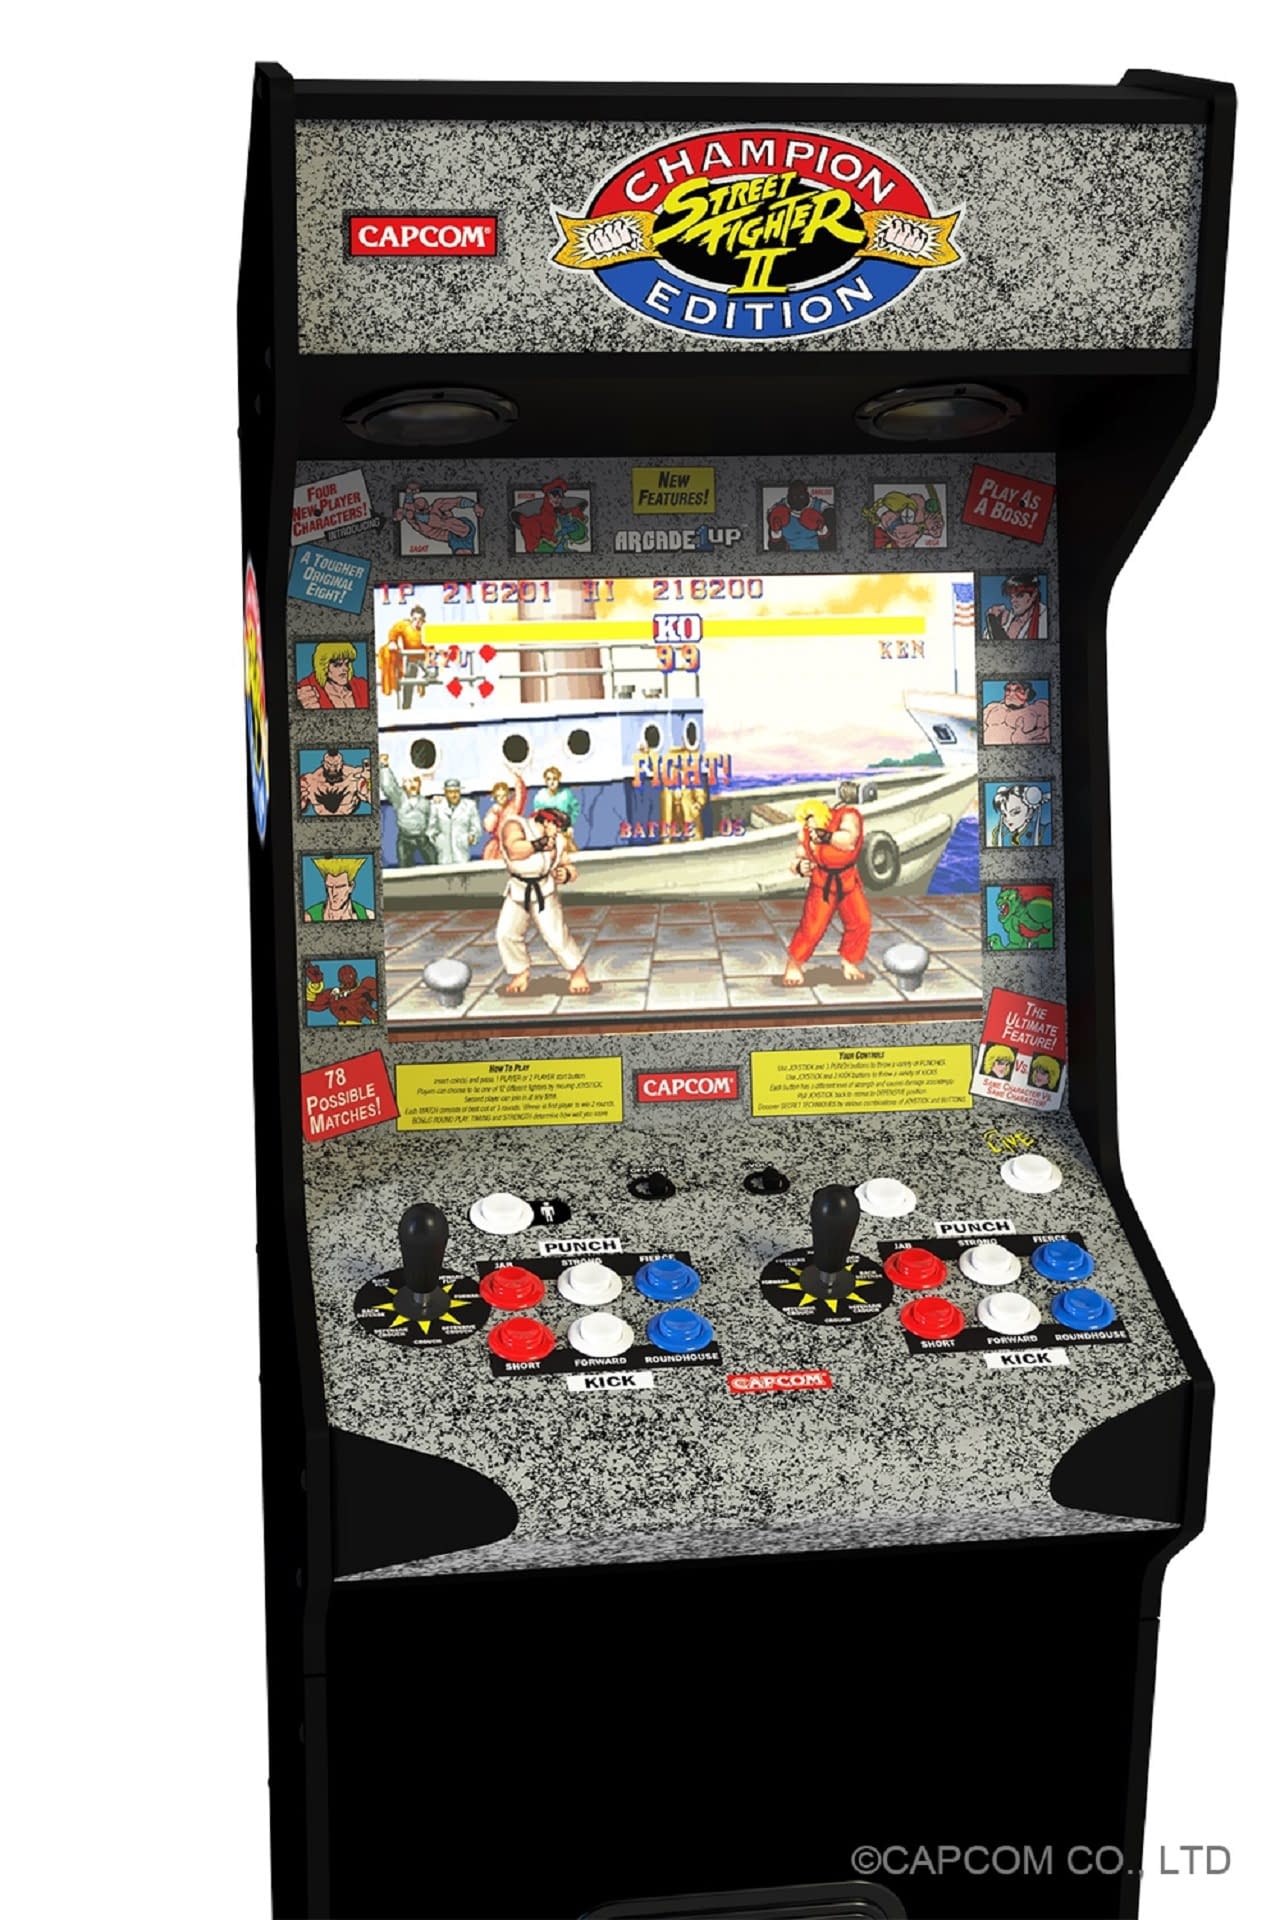 Arcade1Up Releases Deluxe Edition Arcade Cabinets